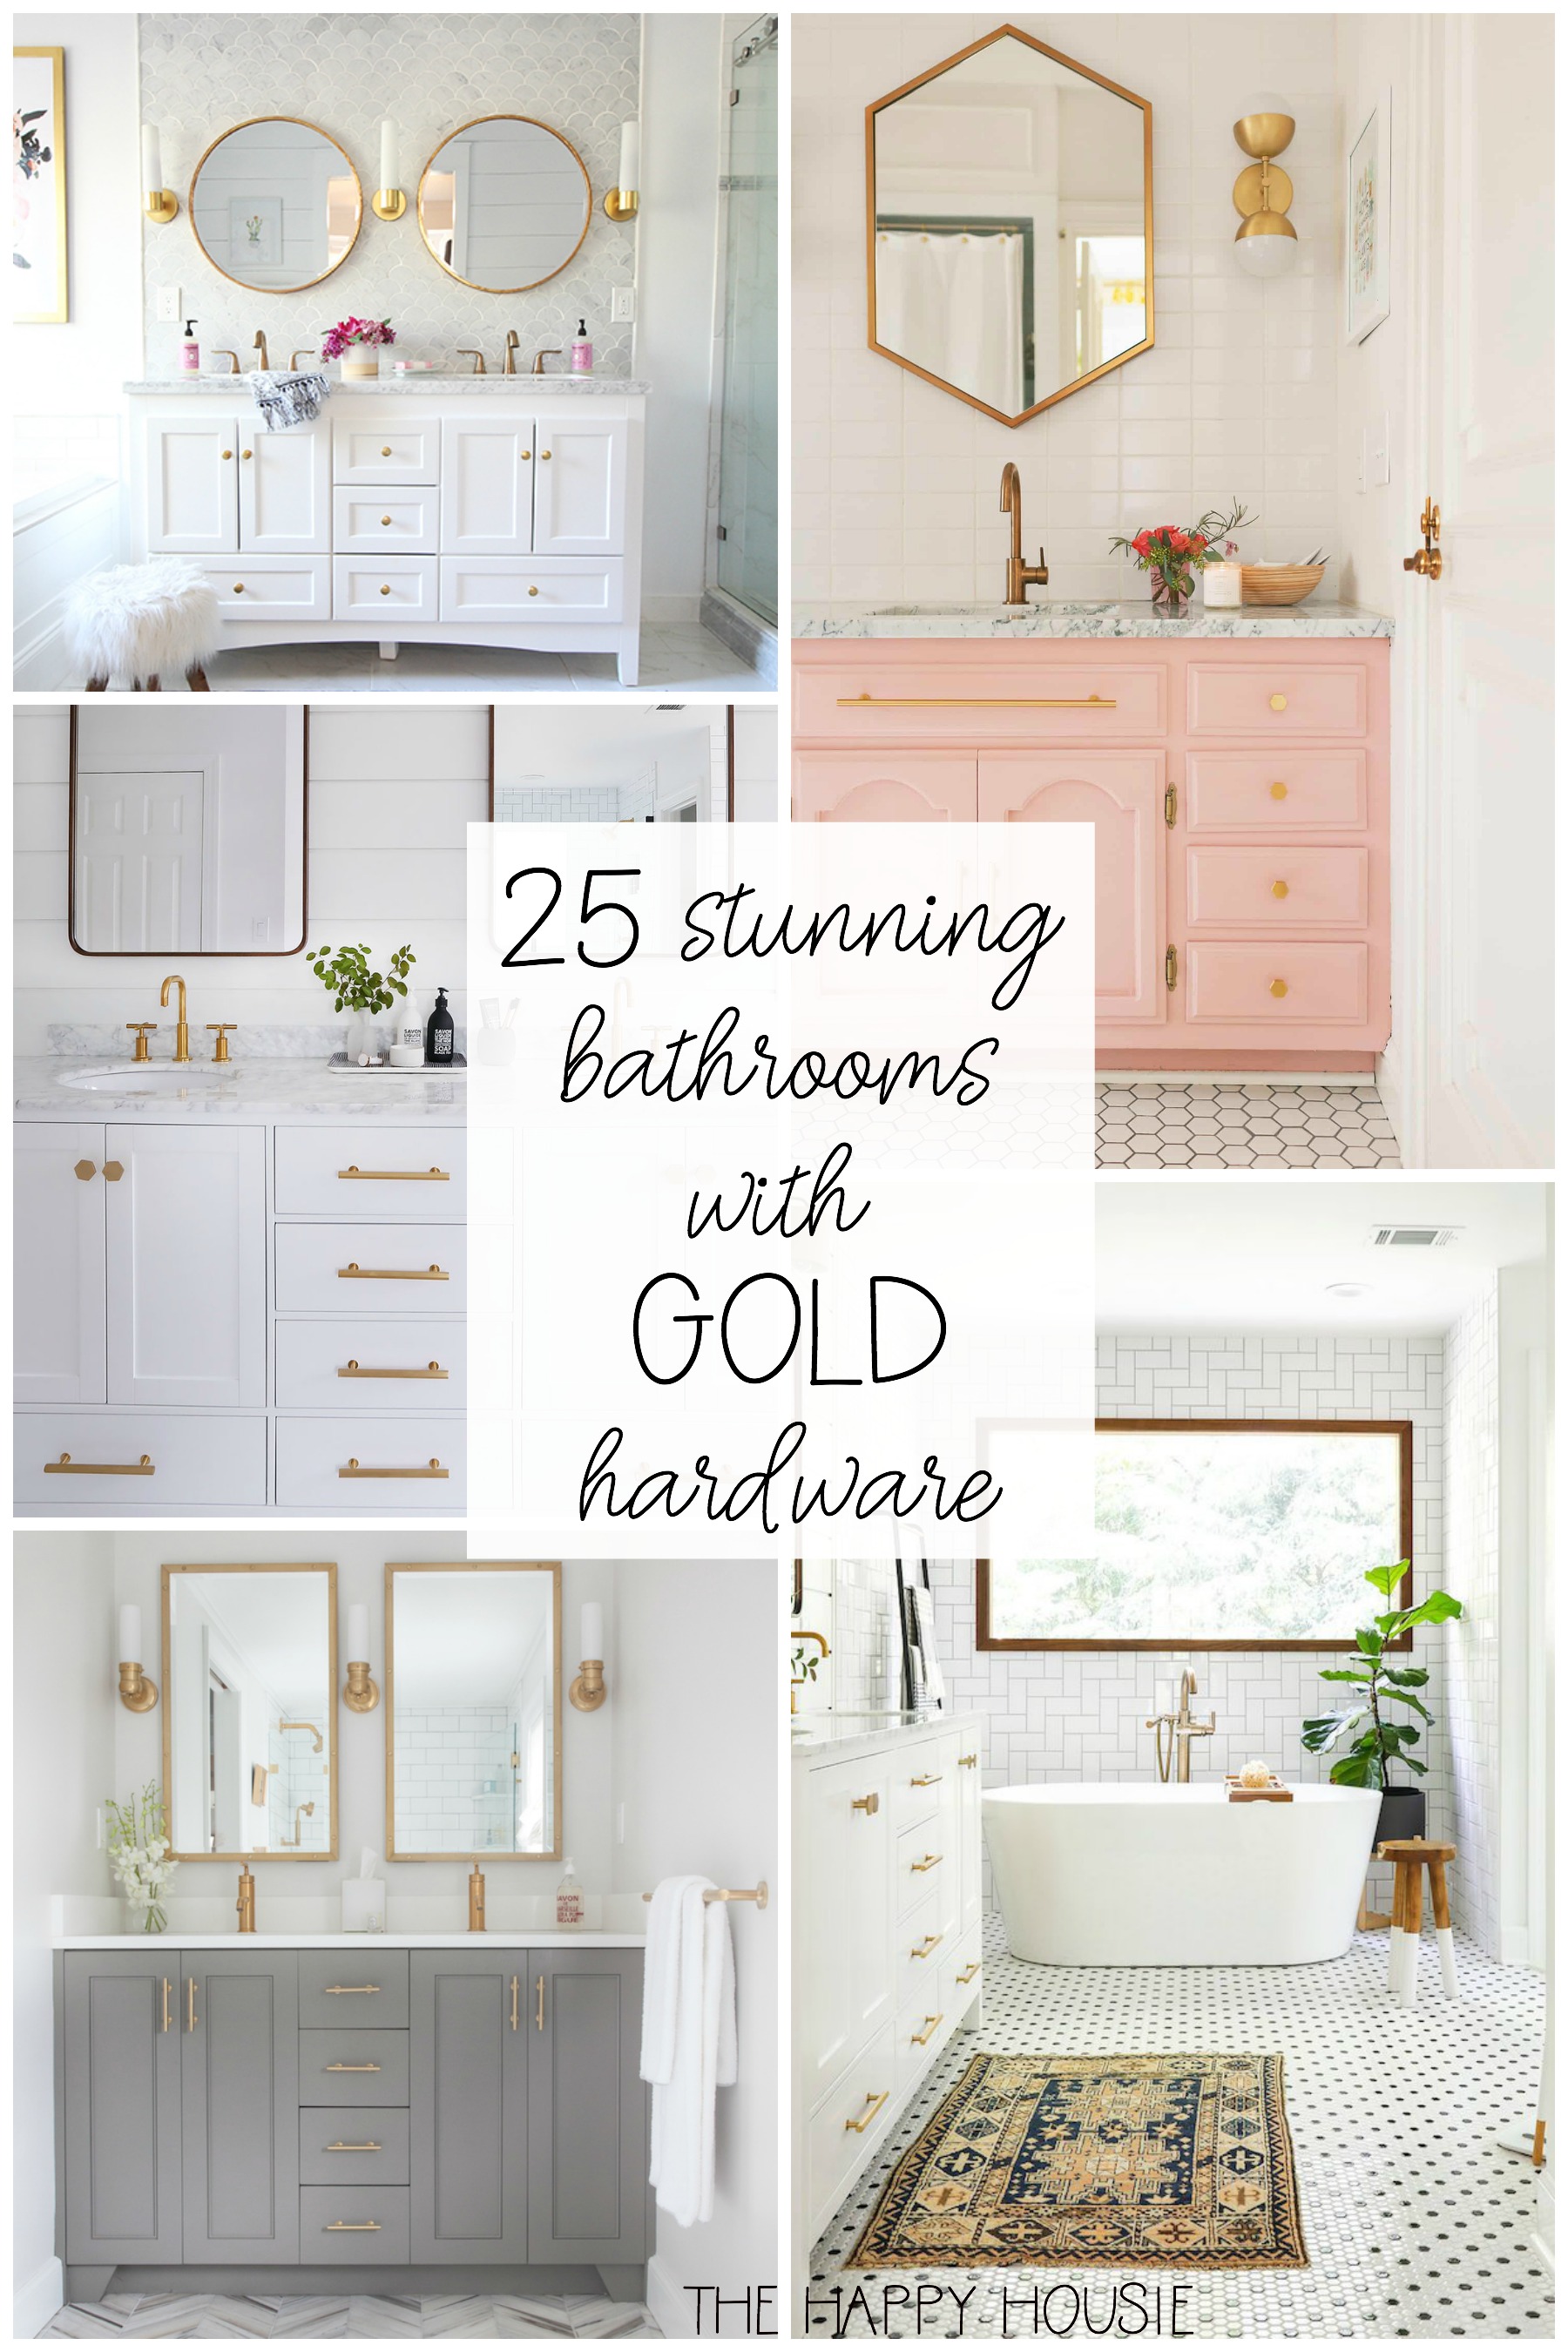 25 Stunning Bathroom With Gold Hardware graphic.